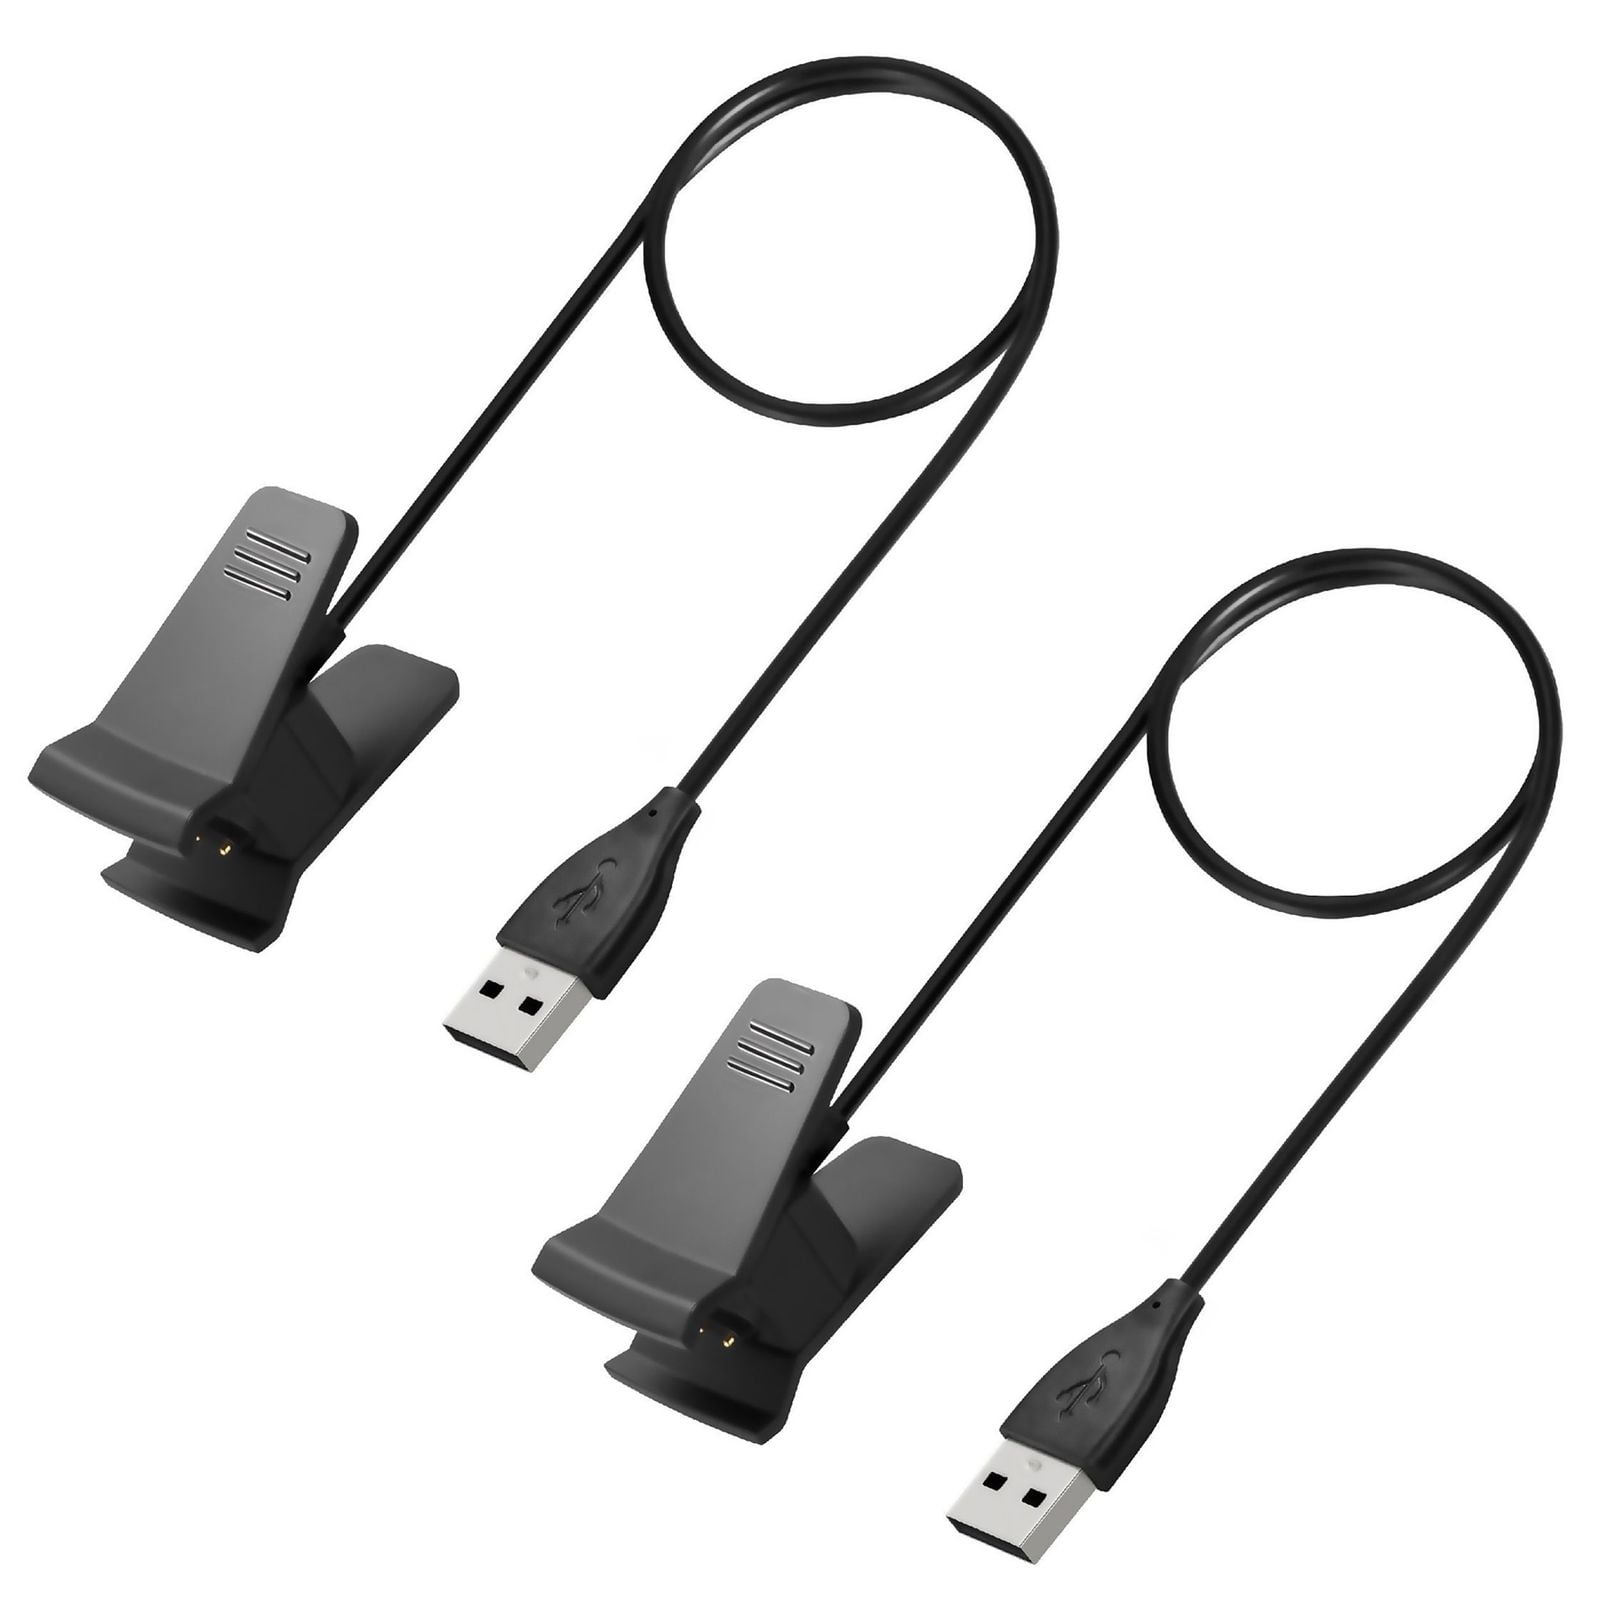 USB Charging Cable Charger Lead for Fitbit CHARGE 3 Fitness Tracker Wristband Kj 